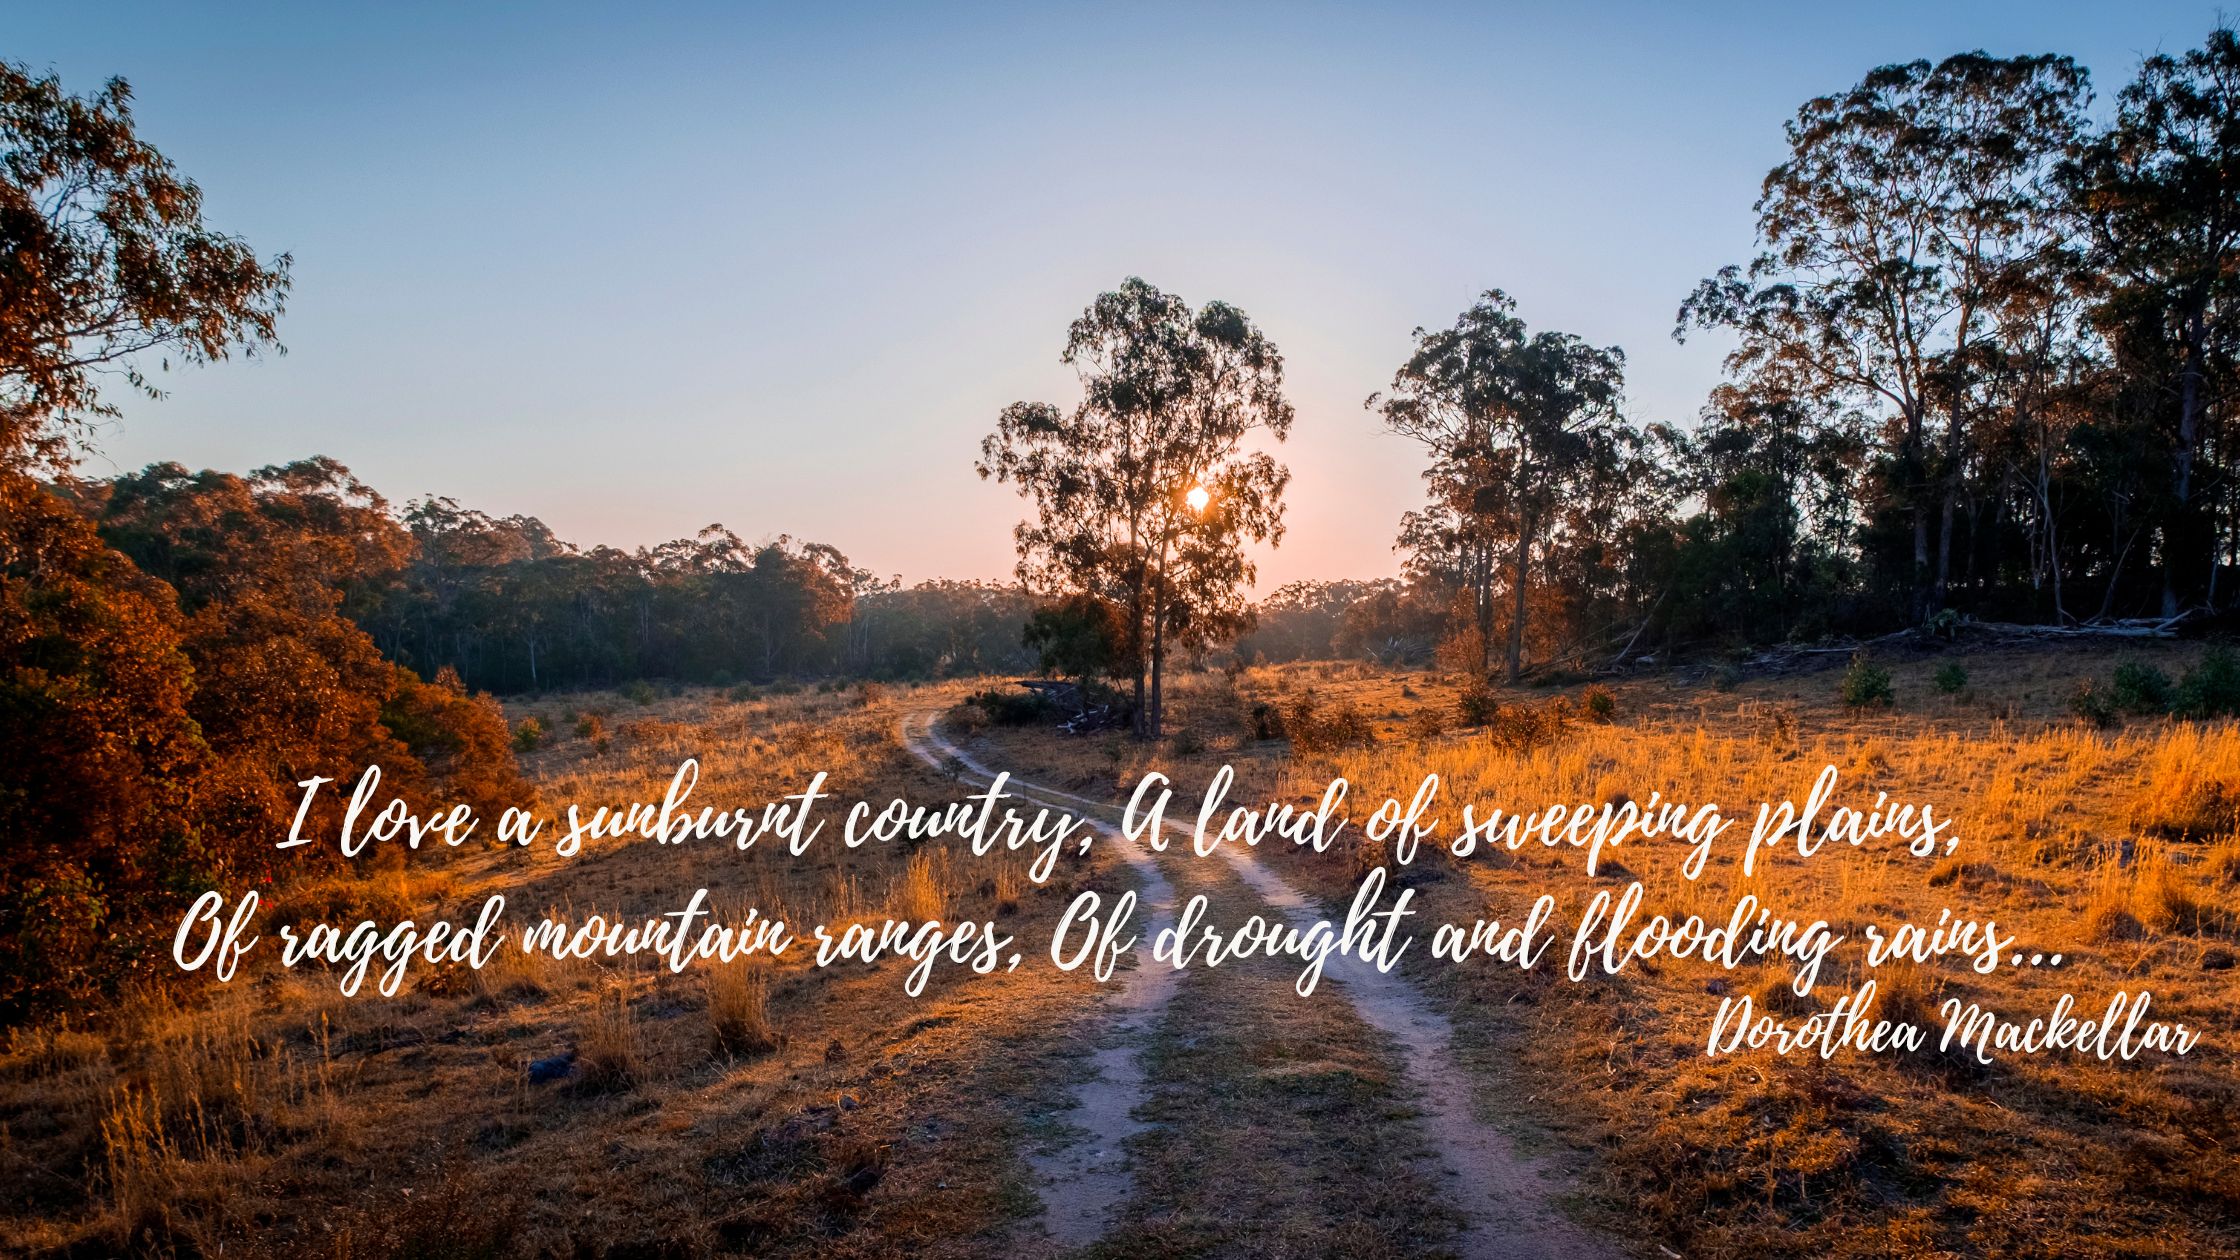 I Love A Sunburnt Country, A Land Of Sweeping Plains, Of Ragged Mountain Ranges, Of Drought And Flooding Rains.